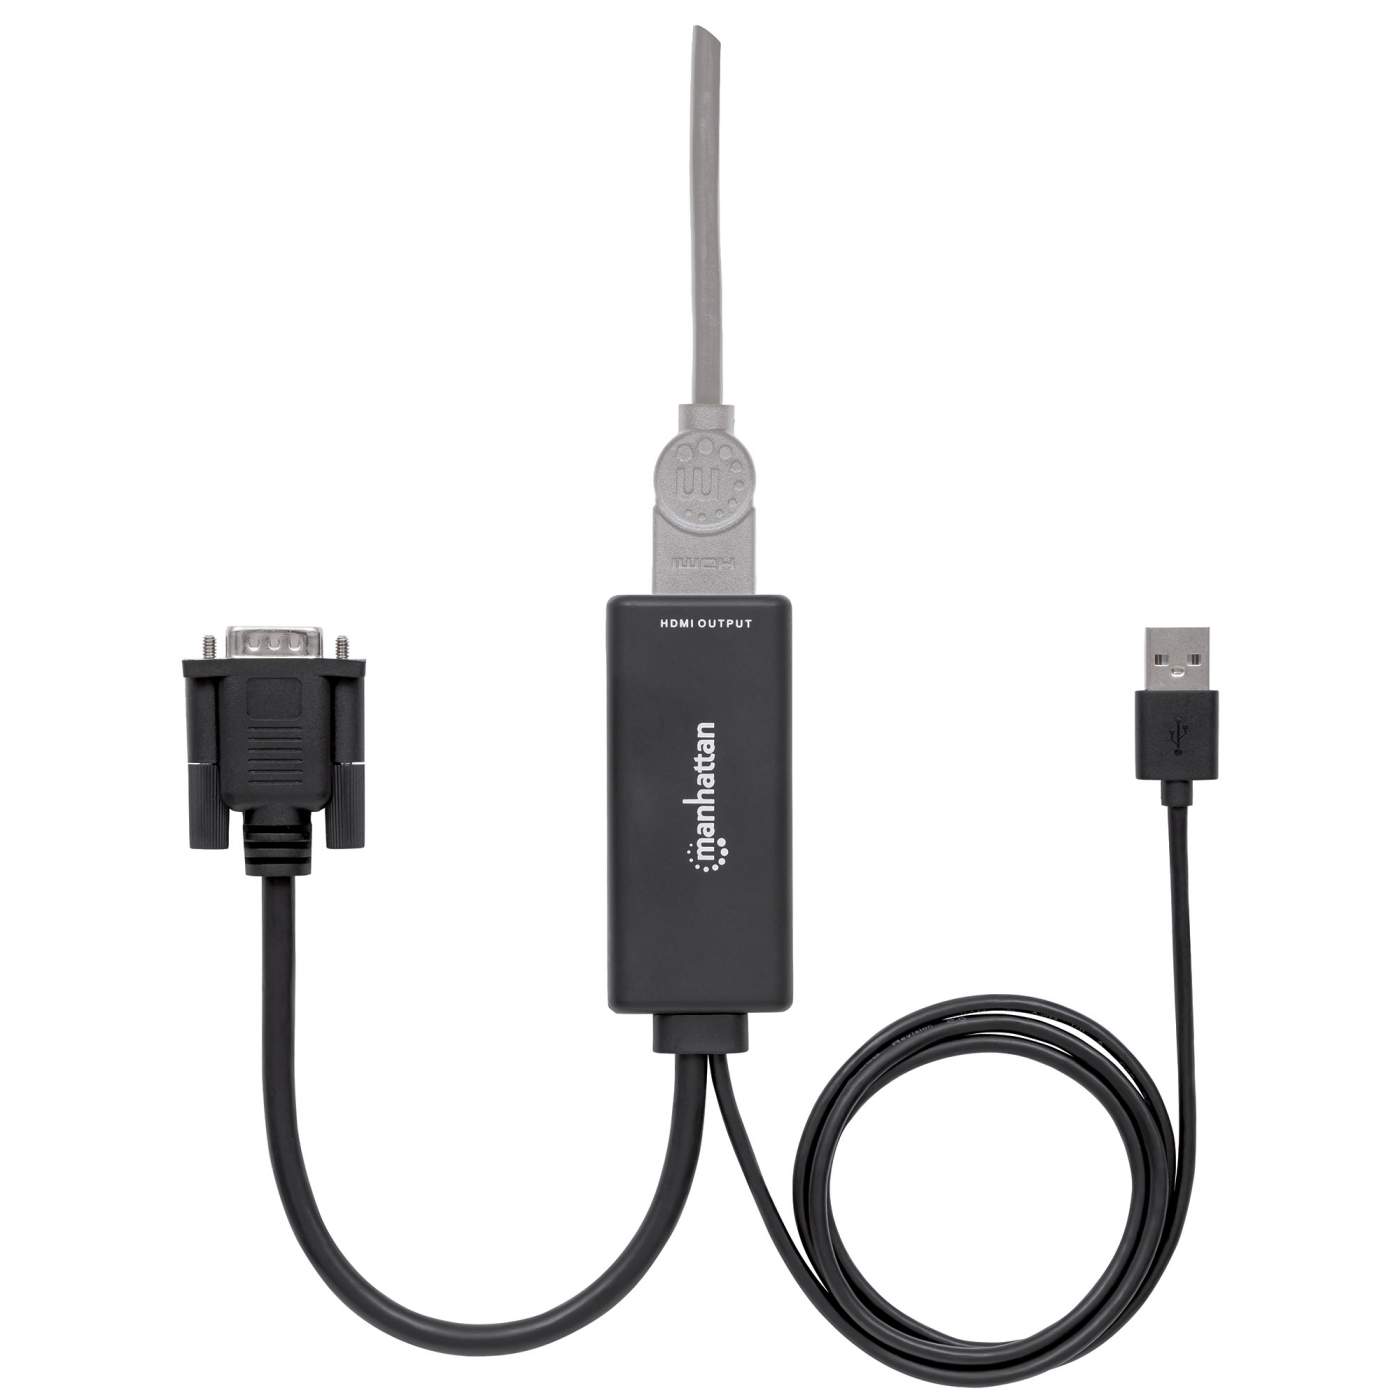 VGA to HDMI Adapter with Audio Support